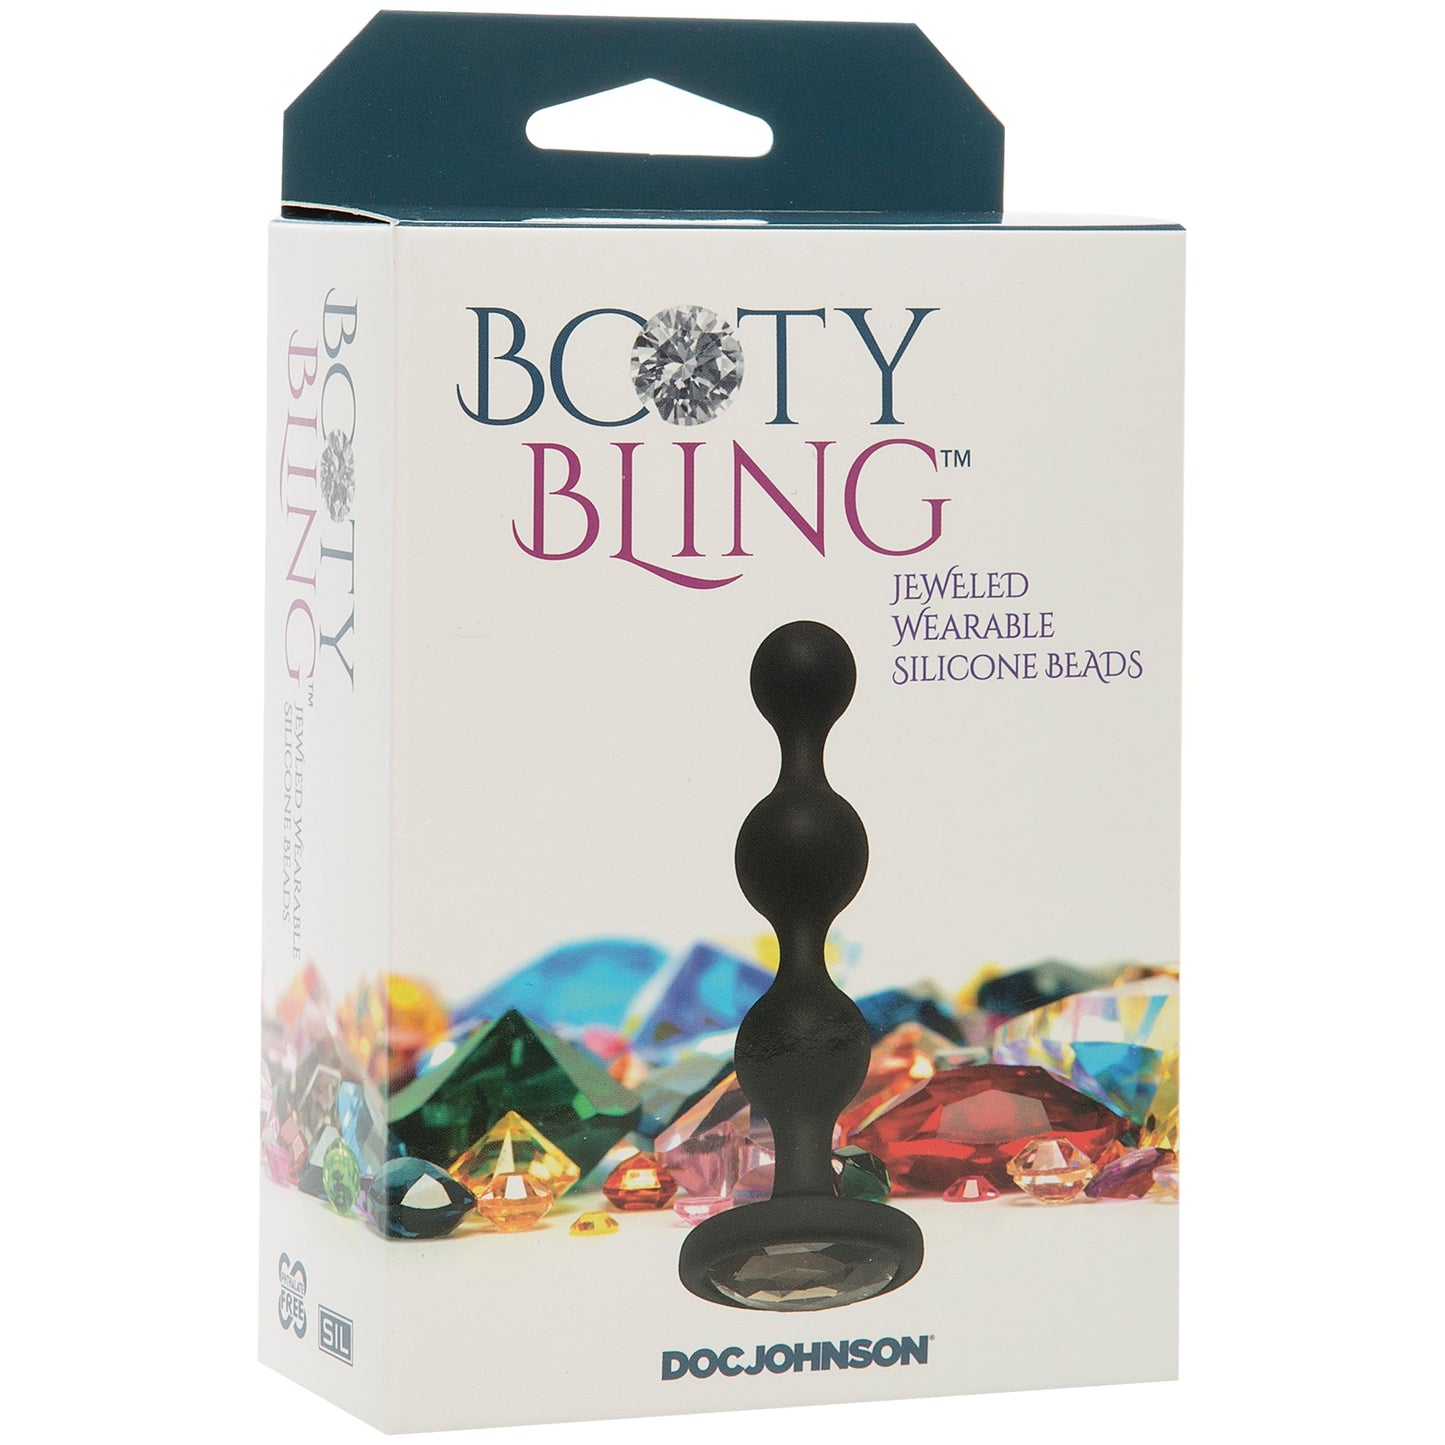 Booty Bling - Wearable Silicone Beads - Silver